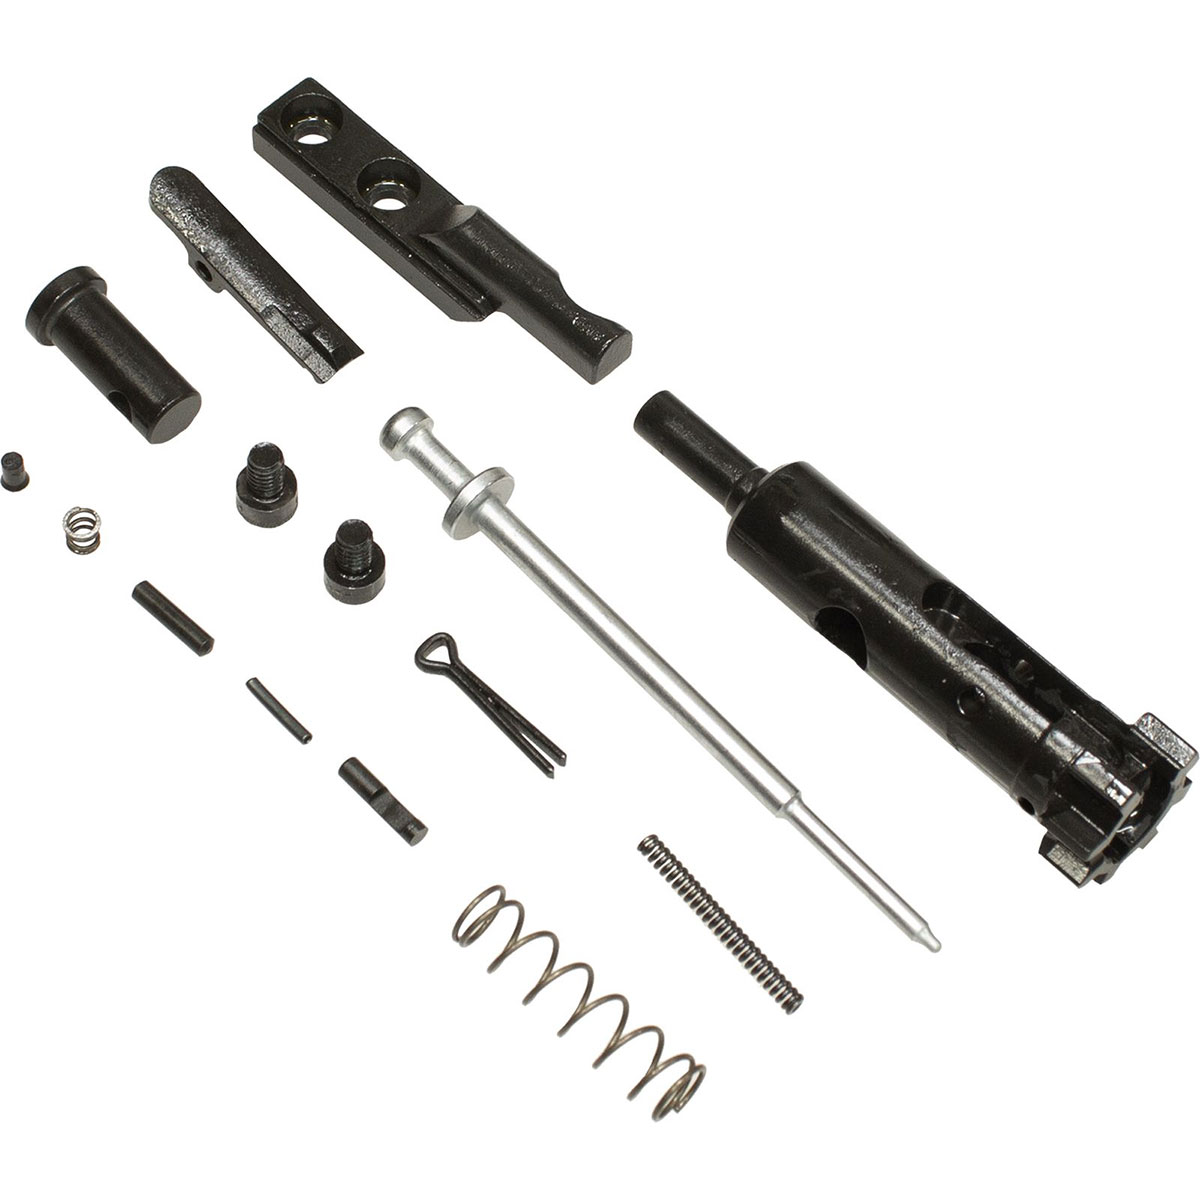 CMMG - MK10 COMPLETE BOLT CARRIER GROUP REPAIR KIT